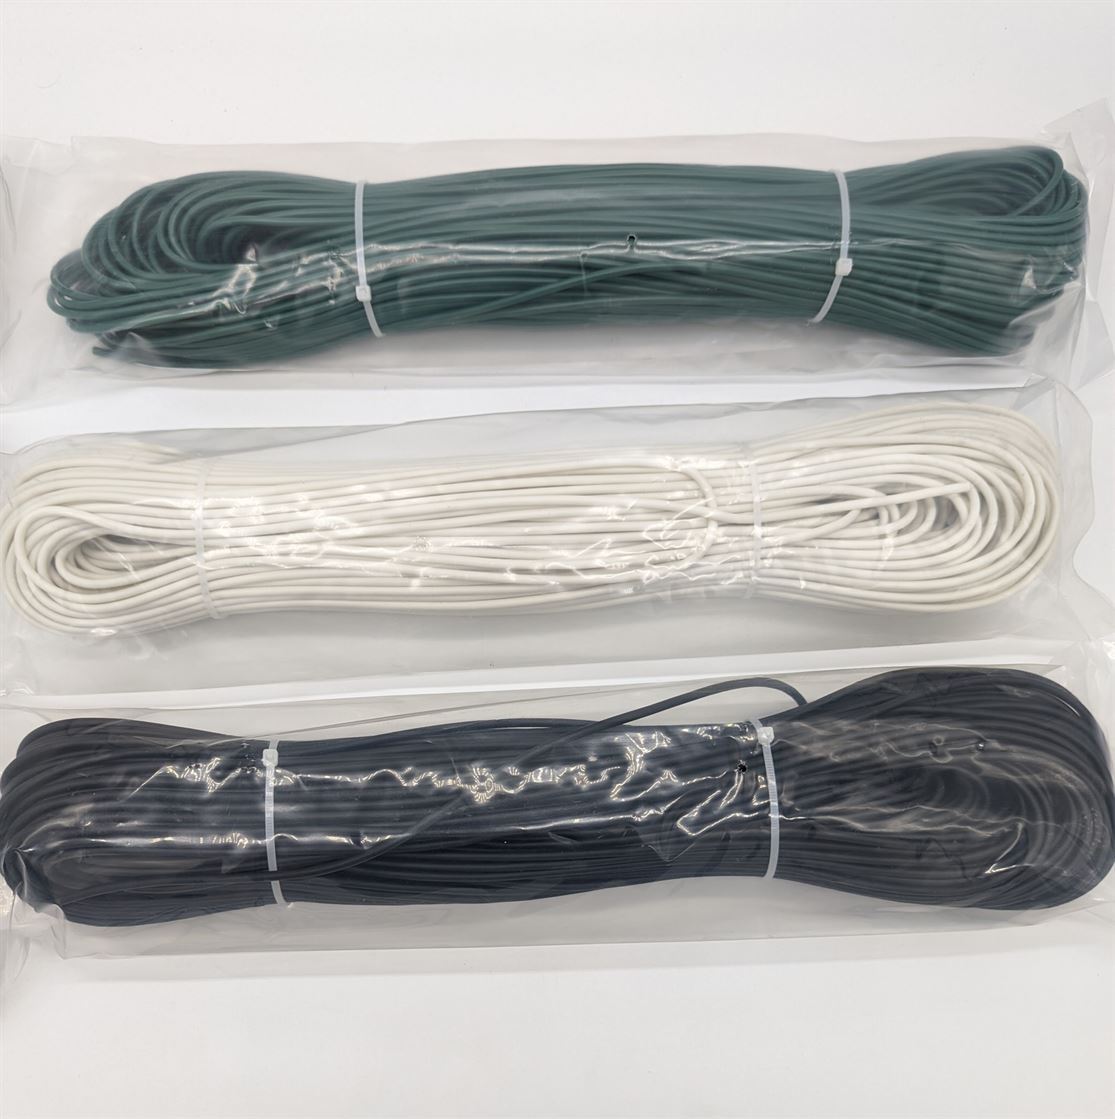 Hills Genuine PVC Clothesline Cord 30m - Colour matched to new Hills Clotheslines - Monument